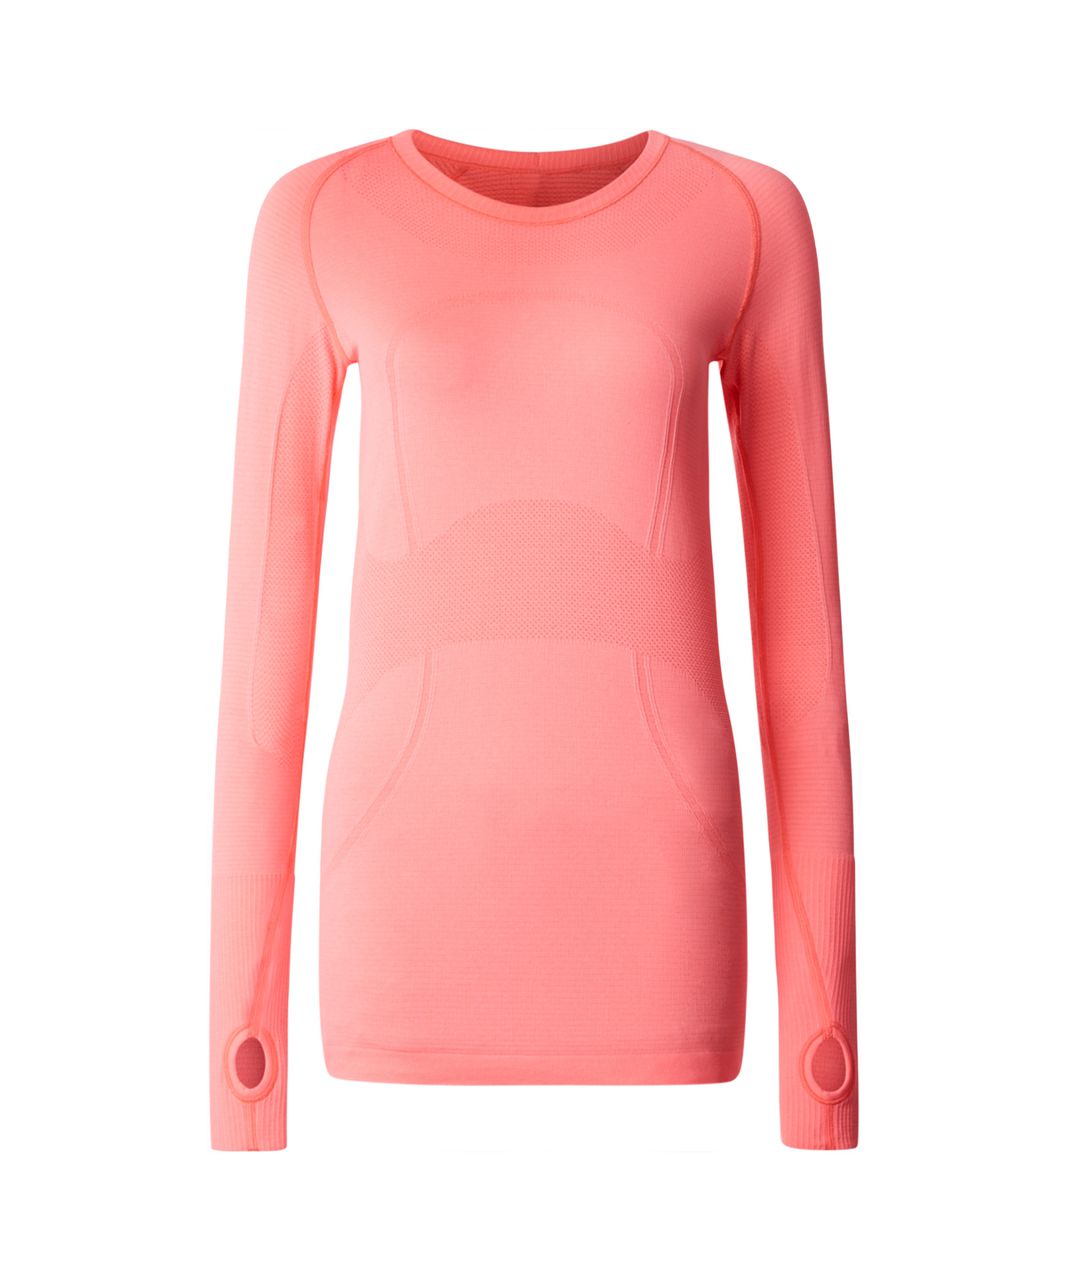 Lululemon Swiftly Tech Long Sleeve Crew - Heathered Very Light Flare (First Release)